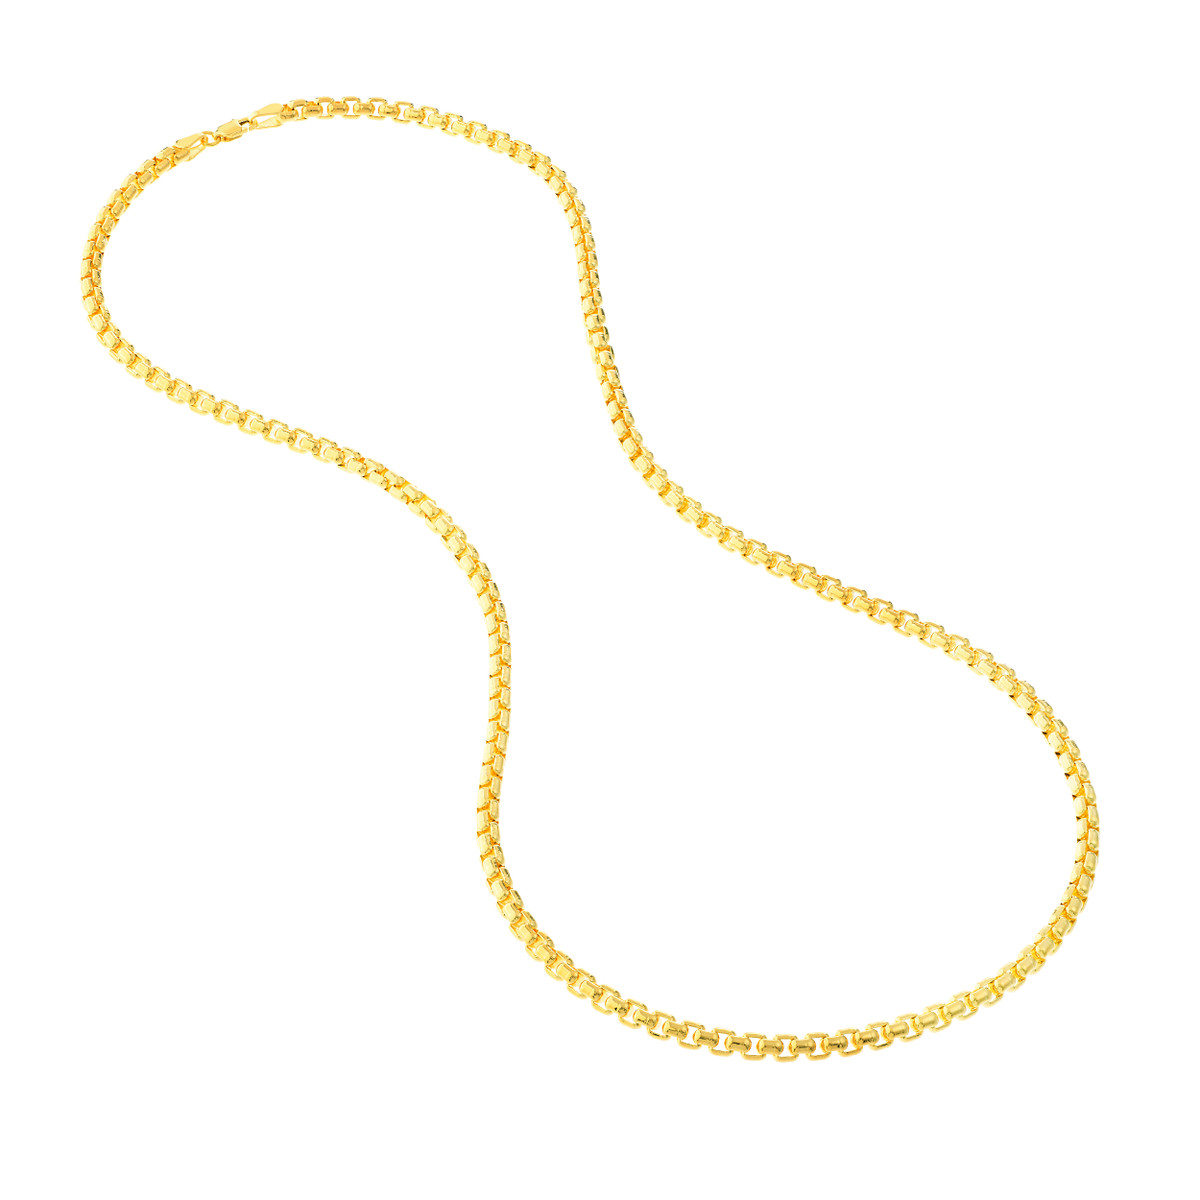 Korman Signature 14k Yellow Gold 3.95mm Solid Round Box Chain With Lobster Lock